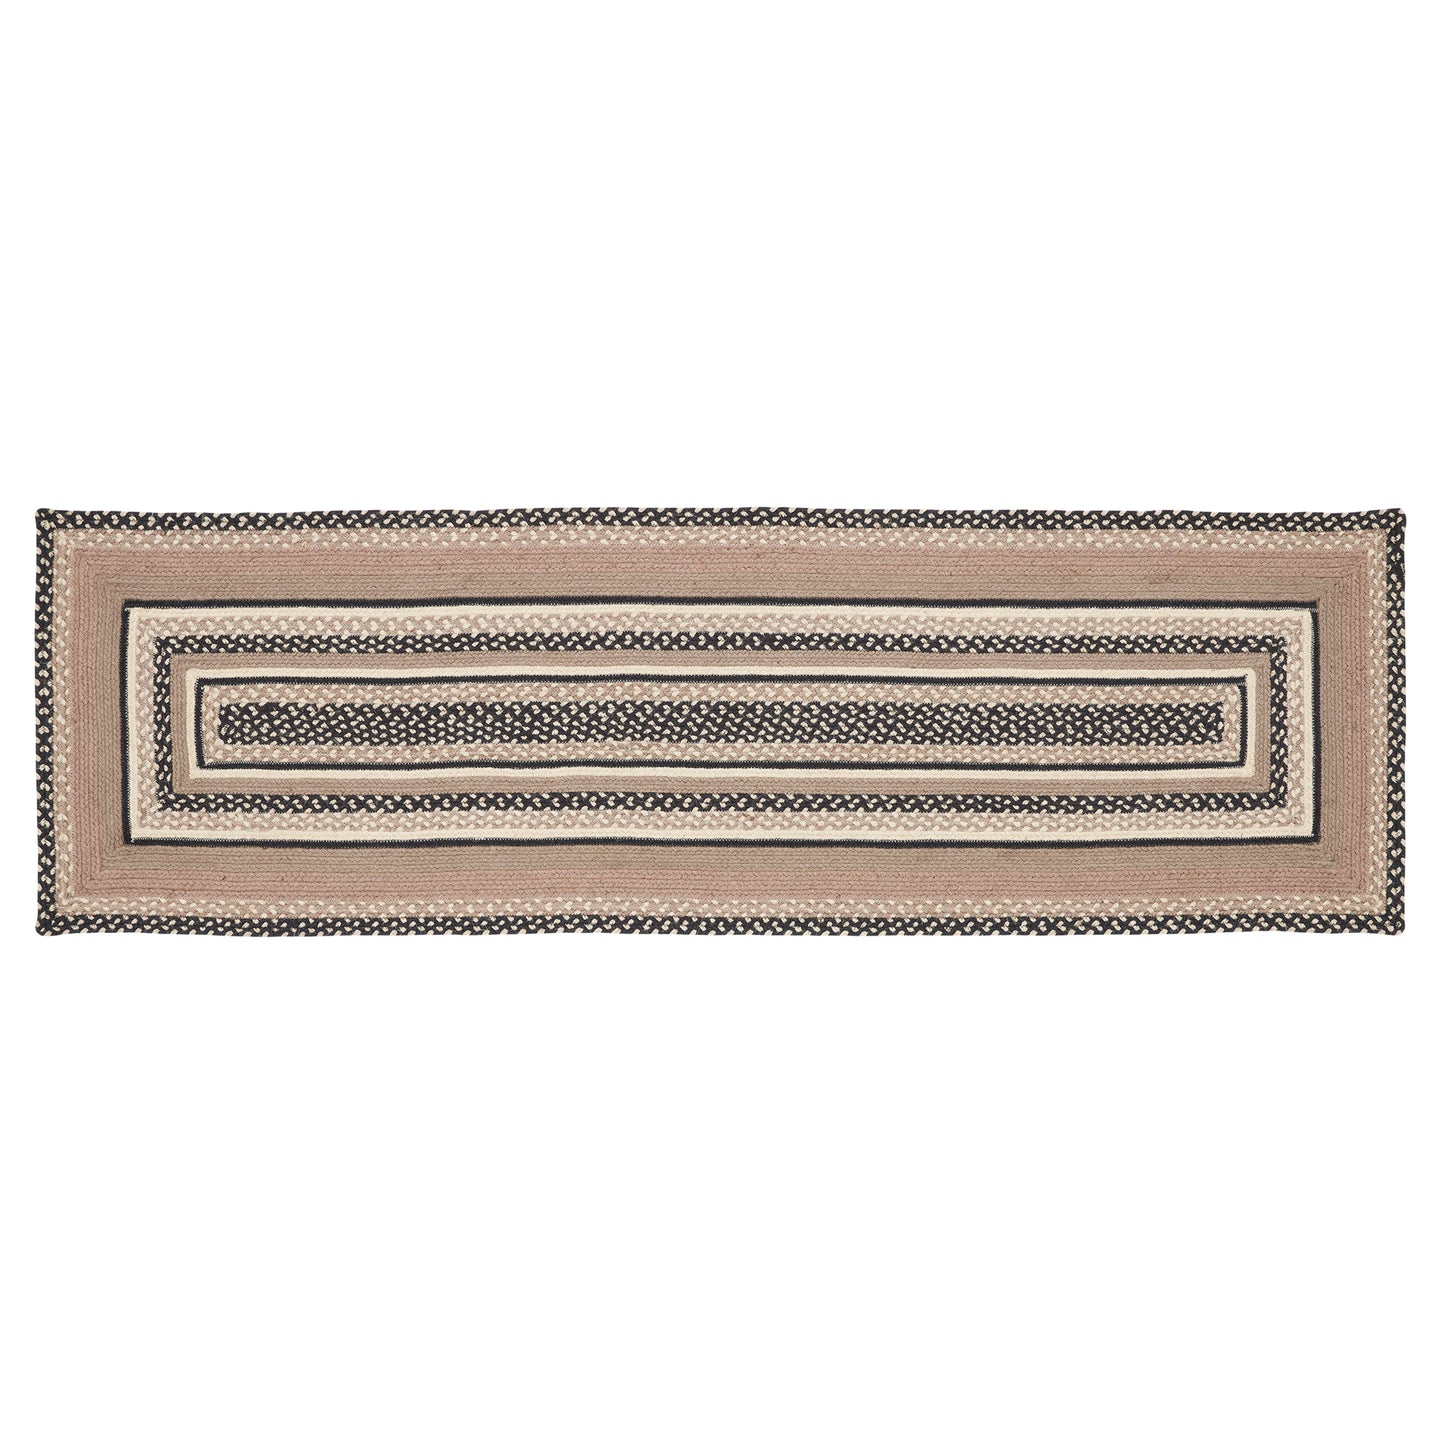 81458-Sawyer-Mill-Charcoal-Creme-Jute-Rug-Runner-Rect-w-Pad-24x78-image-6